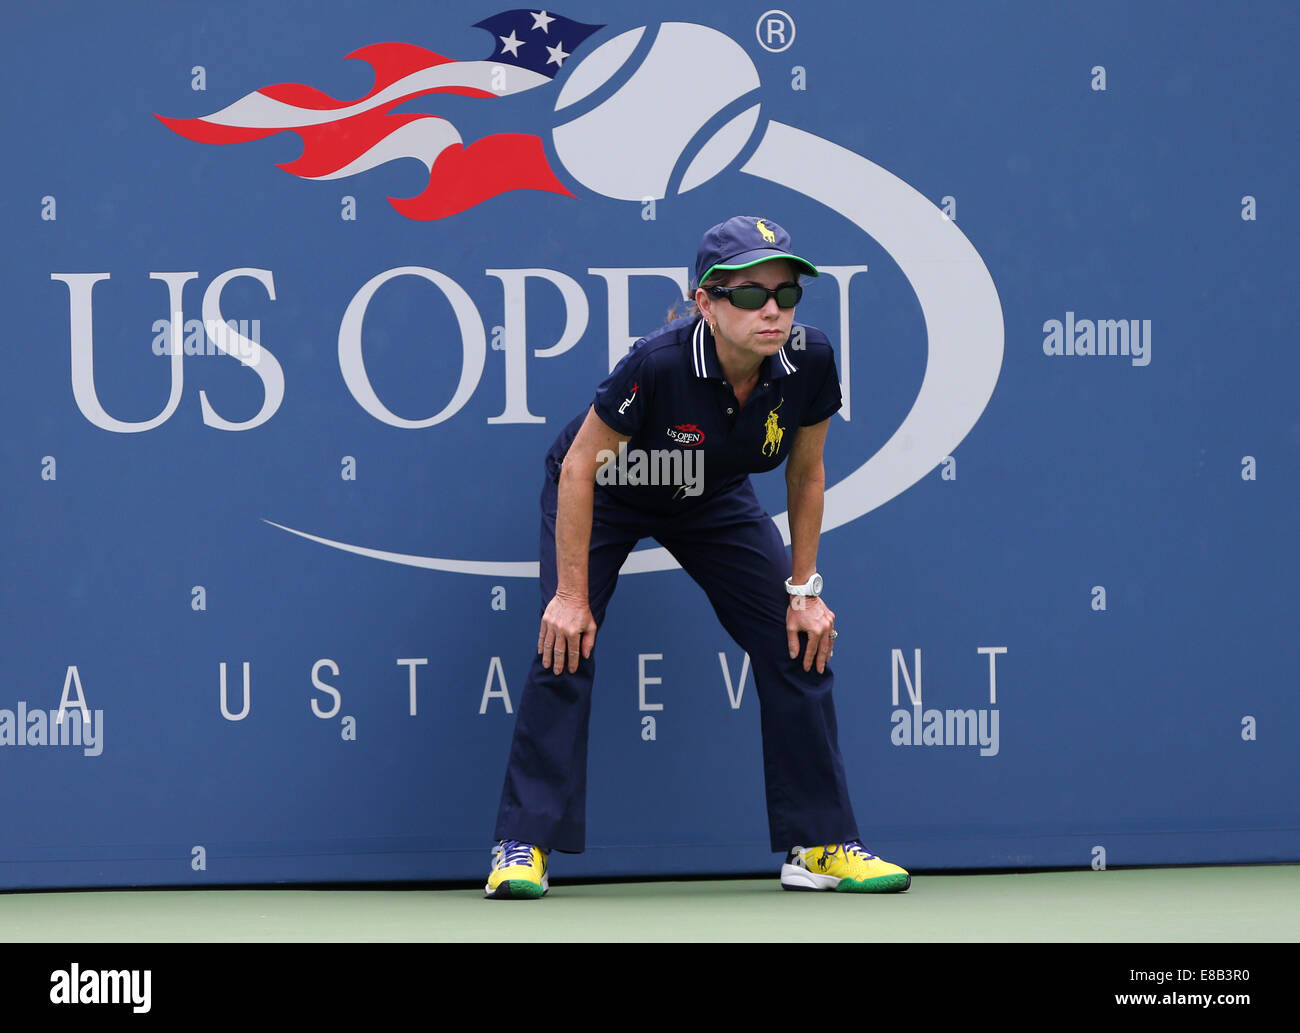 Lineswoman at the US Open 2014 in New York,USA Stock Photo